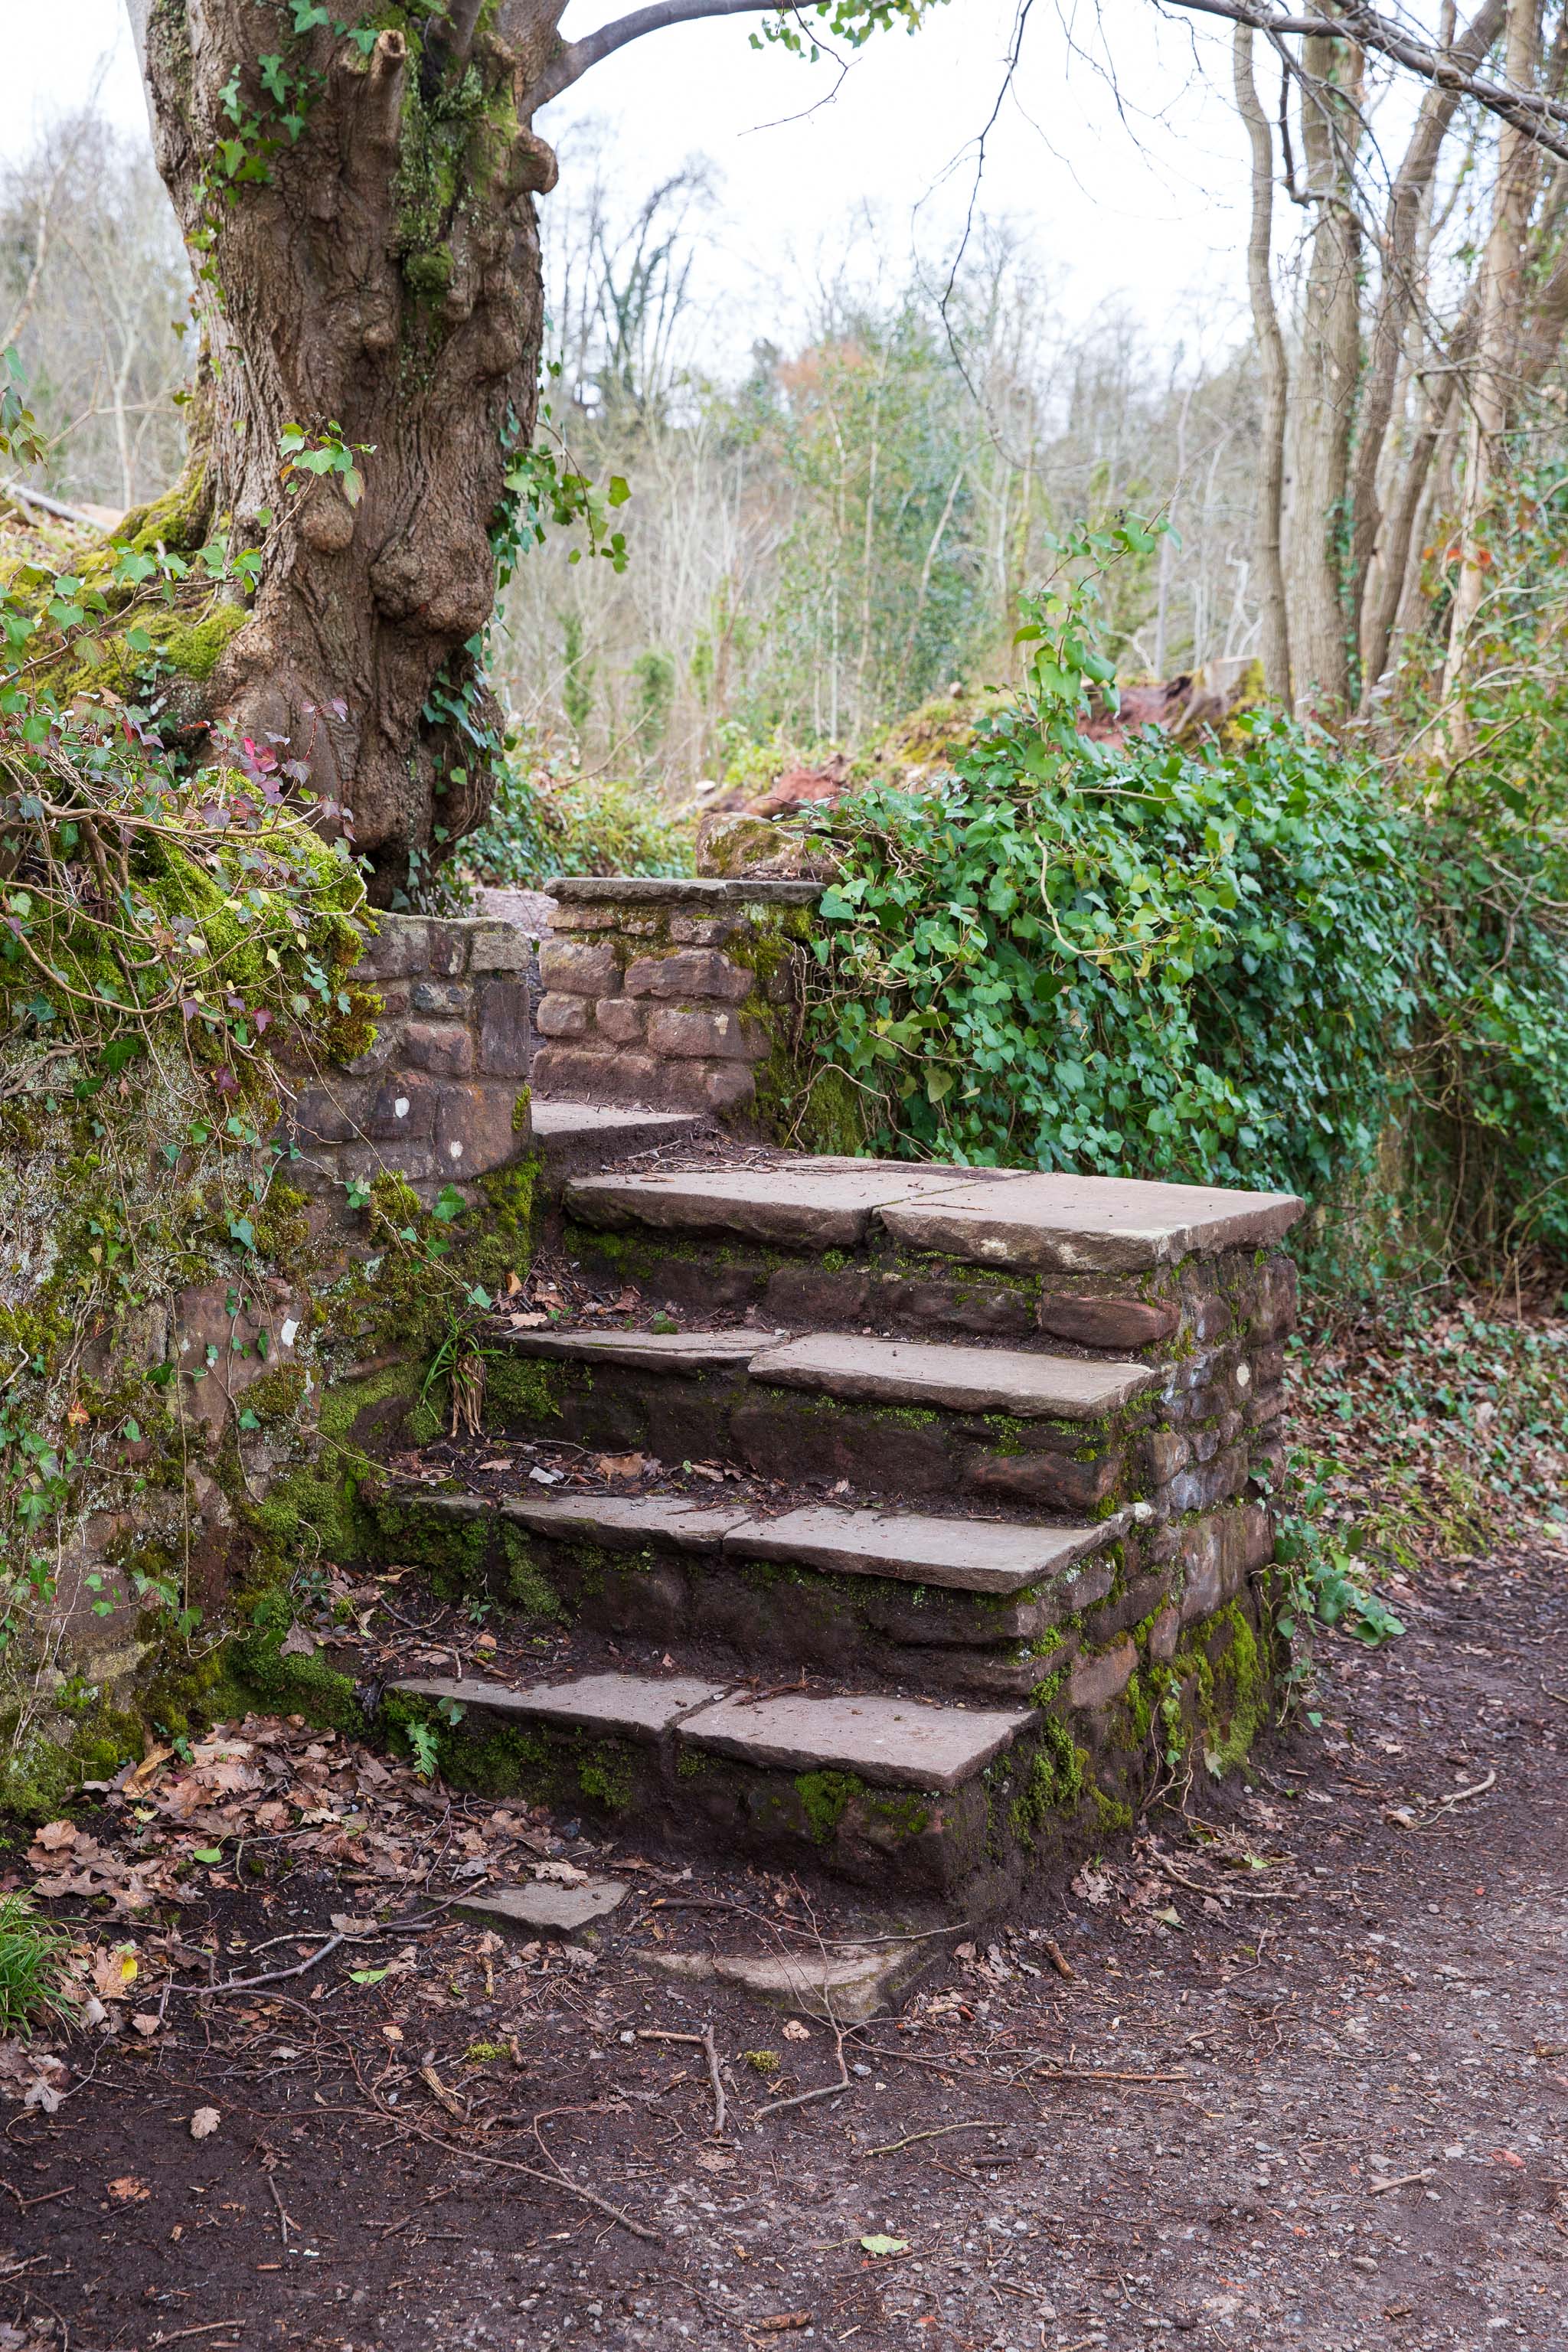 Gratitude
On my long walks on this route, I'm always grateful to see this, I think the only set of steps anyway on the towpath, making them a very distinctiv...